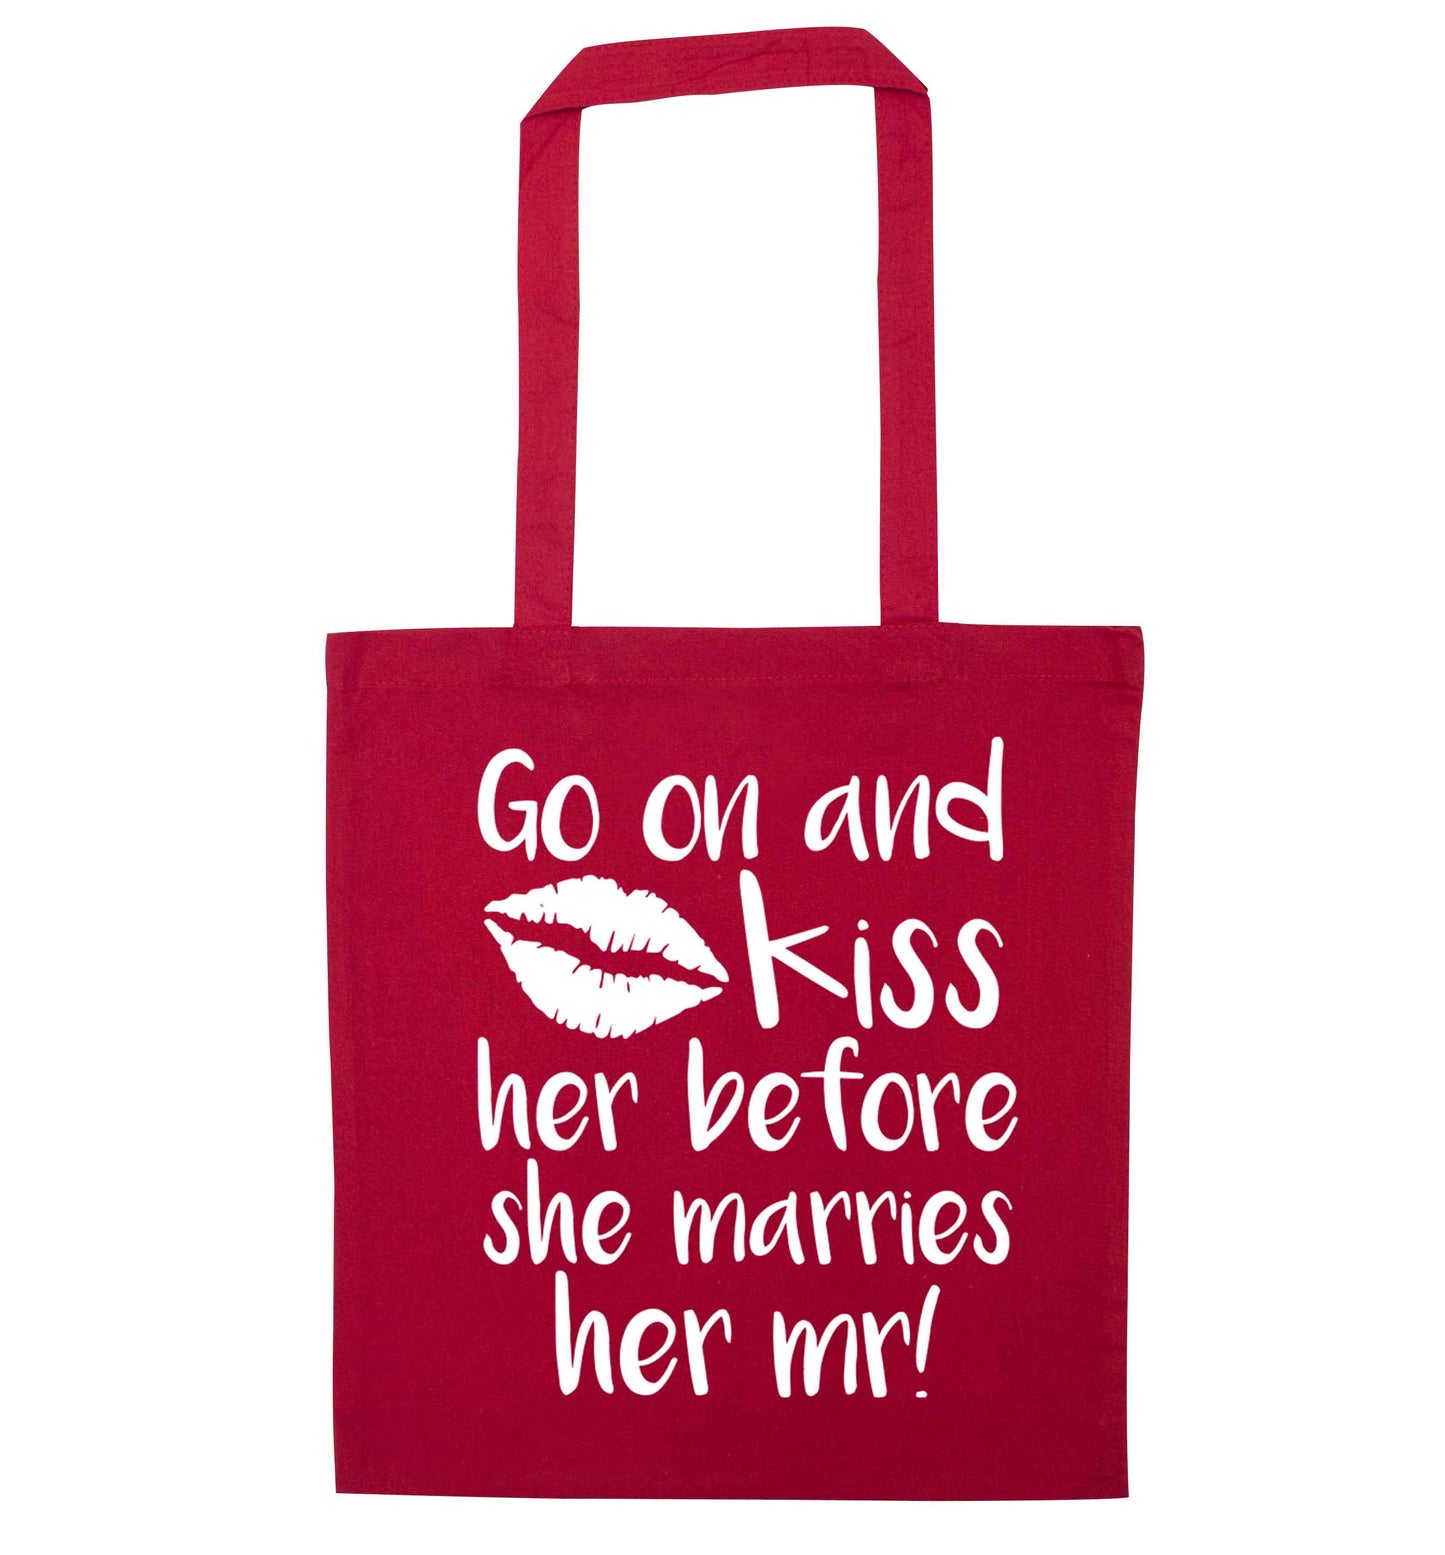 Kiss her before she marries her mr! red tote bag